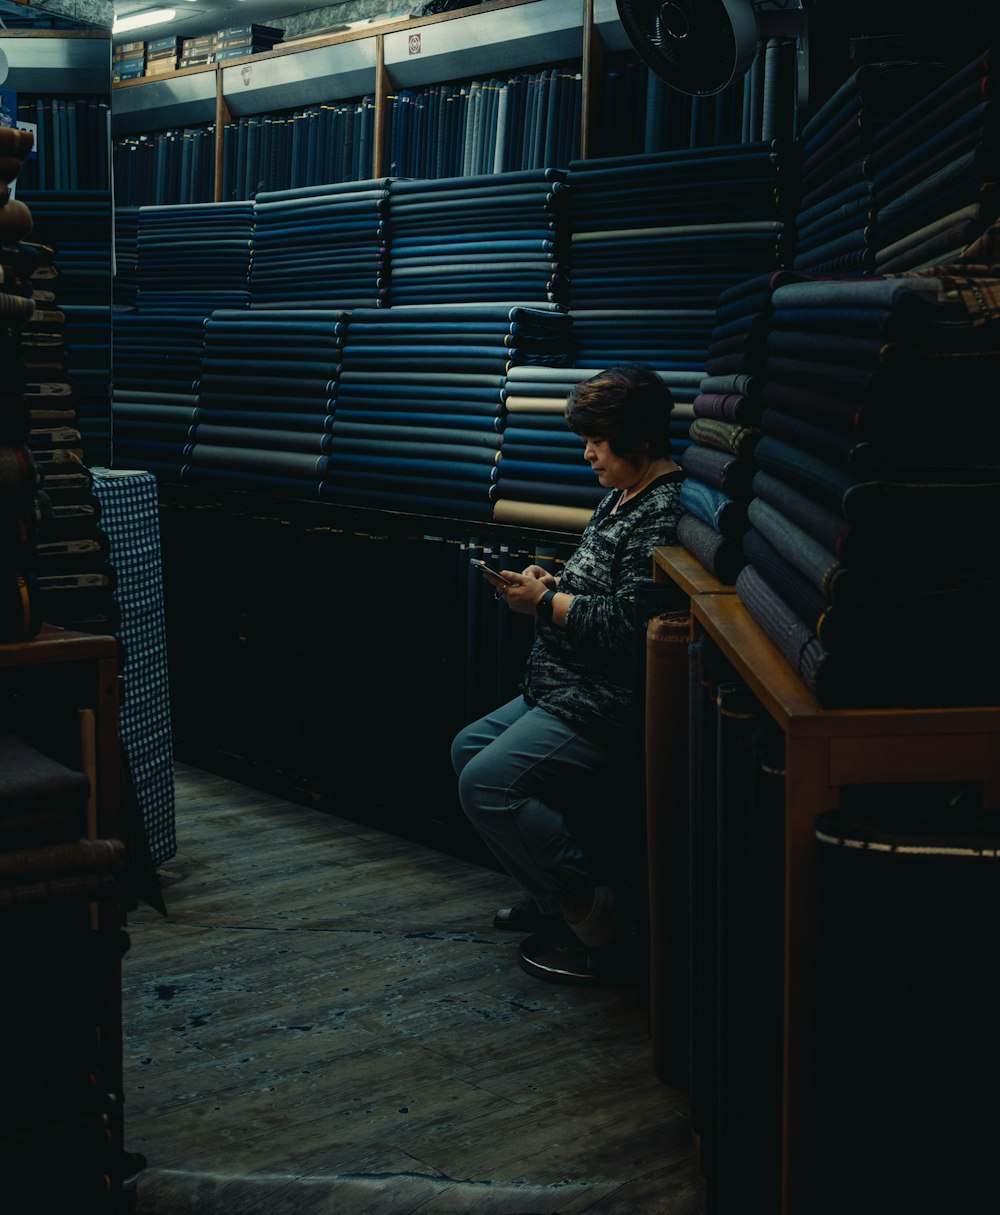 a man sitting on a chair in a room filled with stacks of books